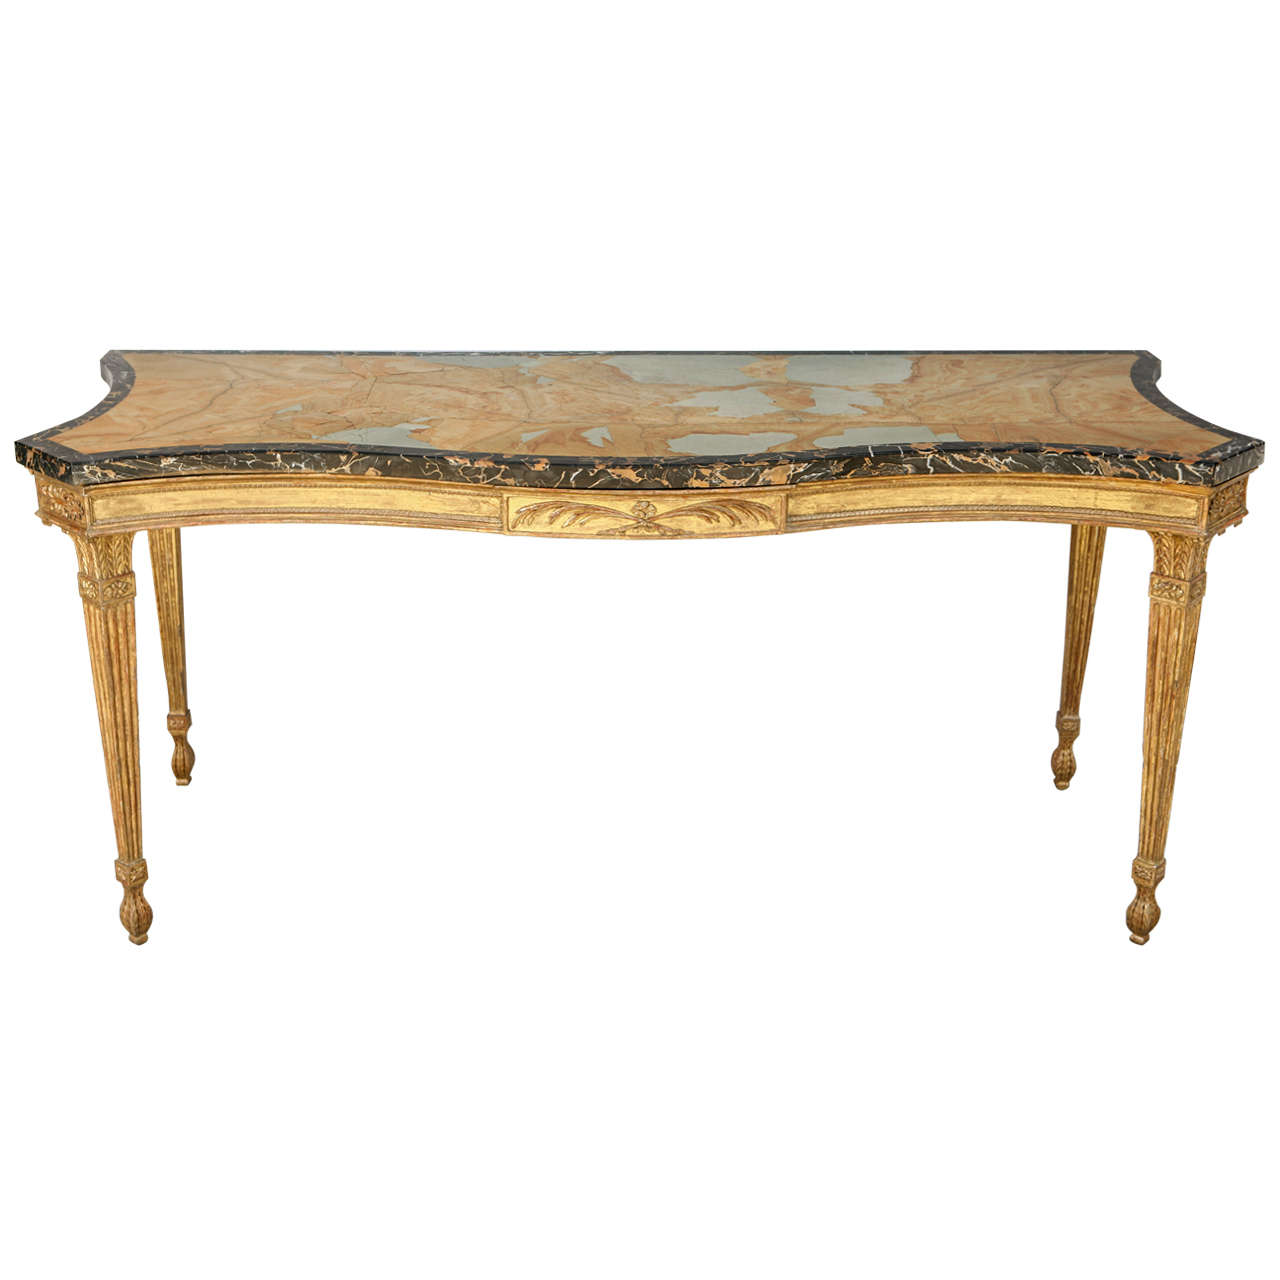 19th Century English Giltwood Serpentine Console with Marble Top